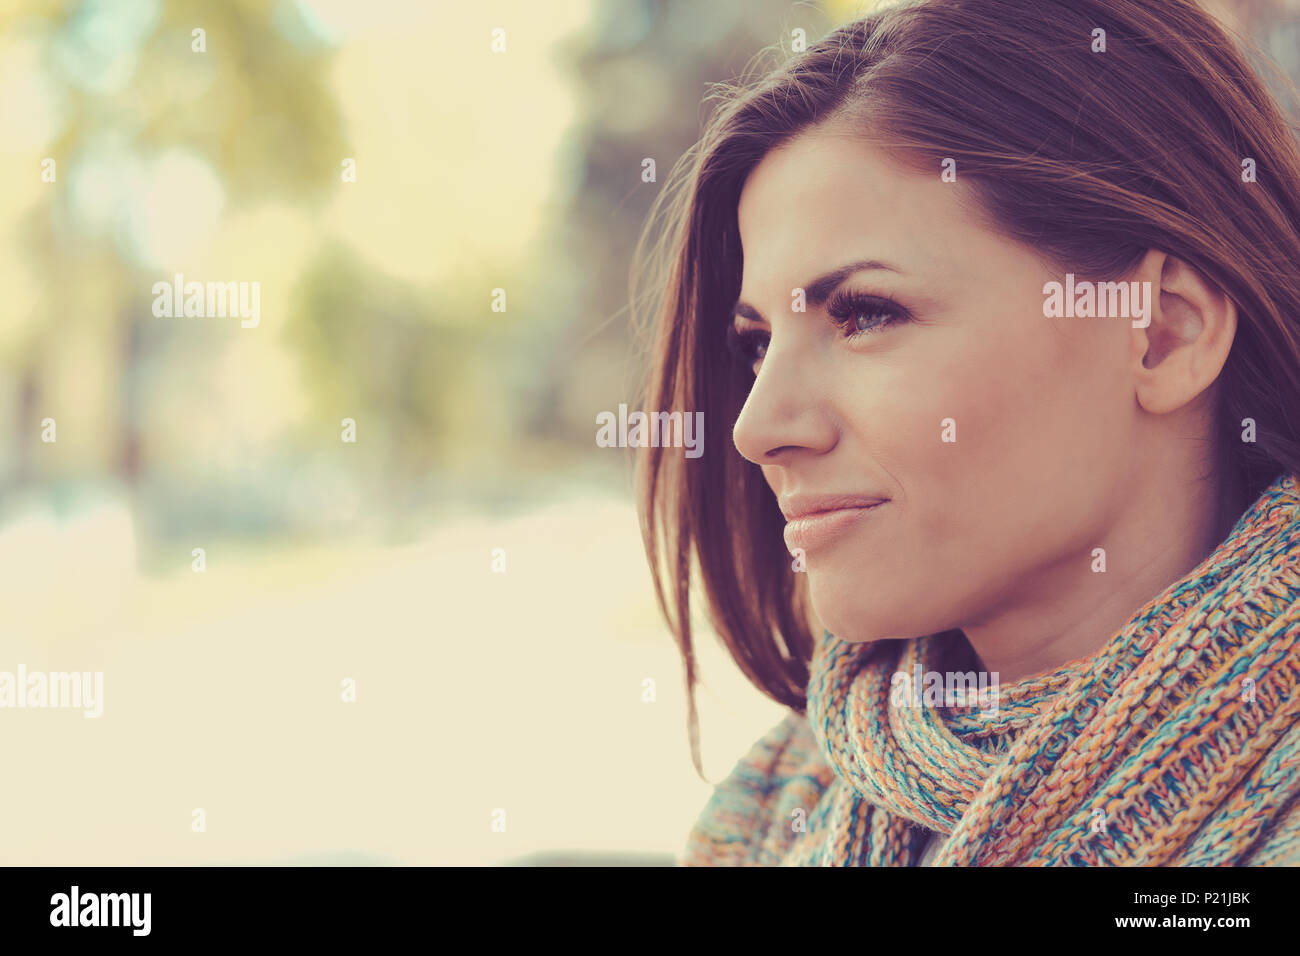 Closeup of a beautiful happy woman on a outdoors city street background Stock Photo